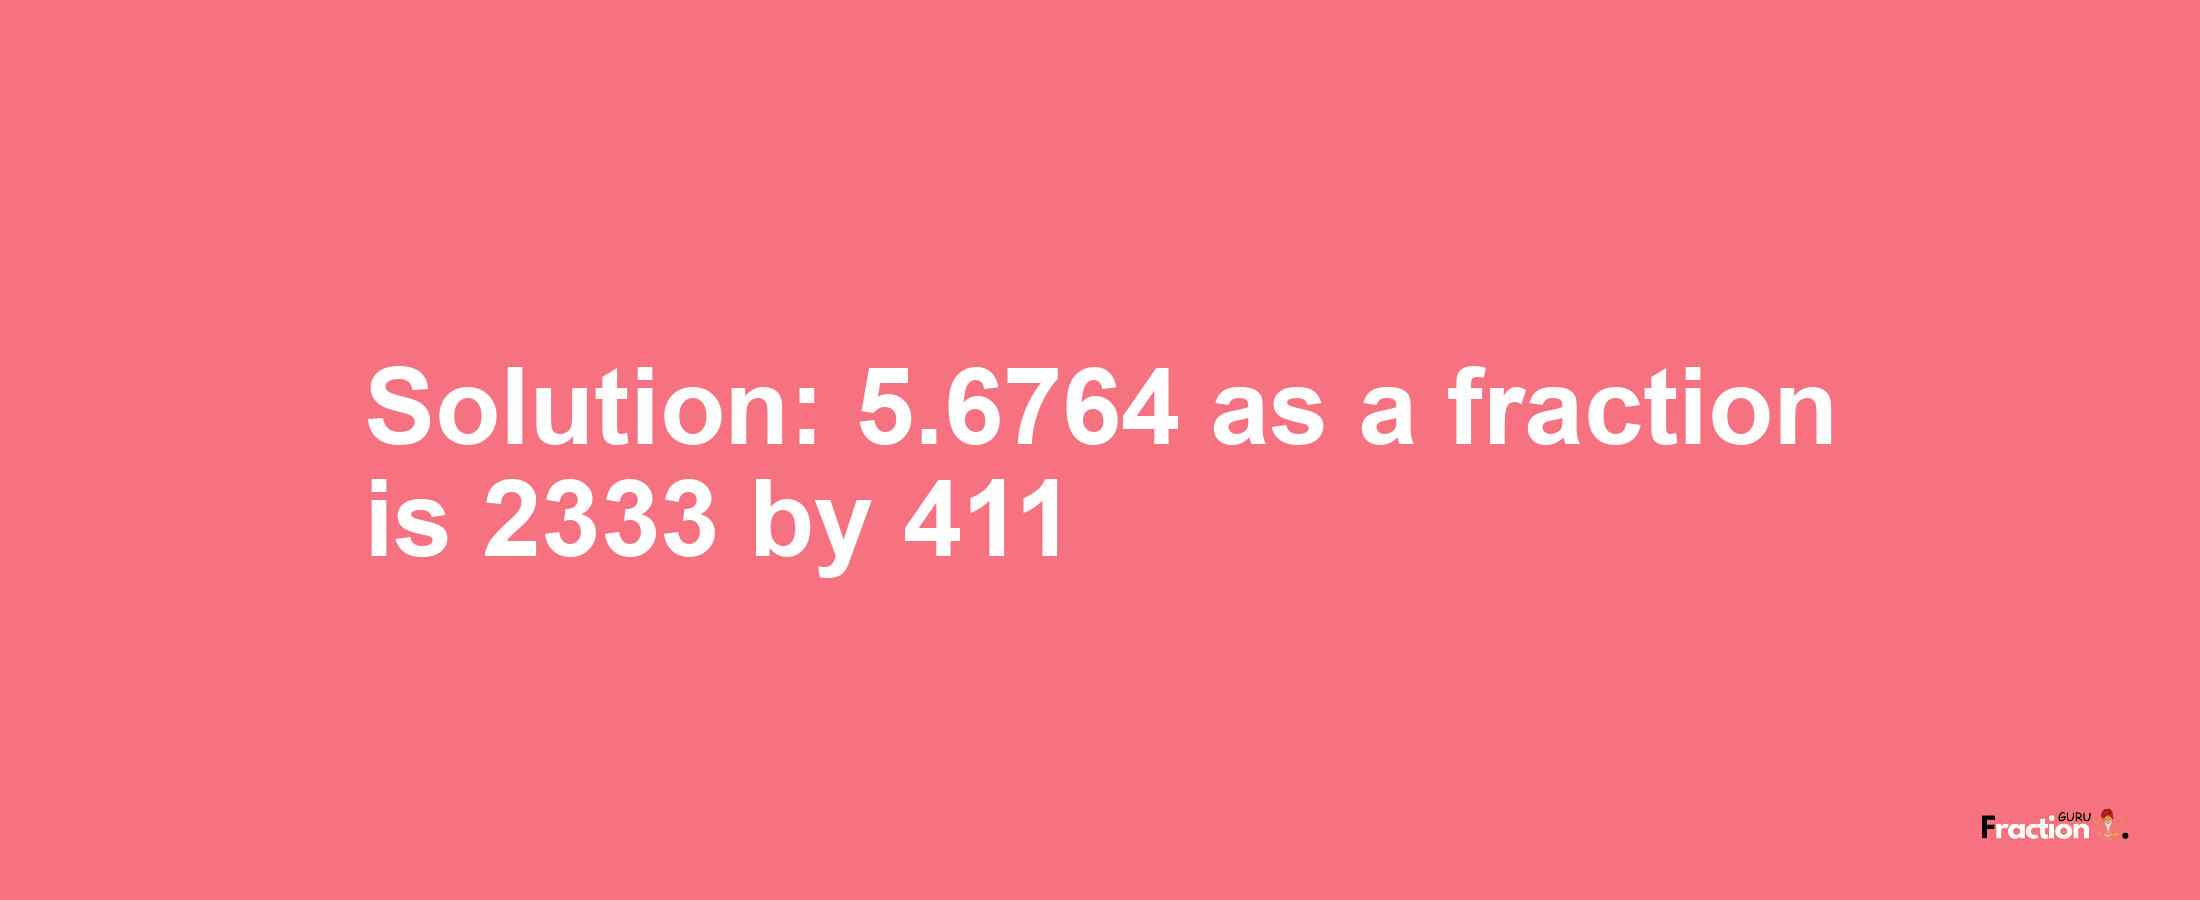 Solution:5.6764 as a fraction is 2333/411